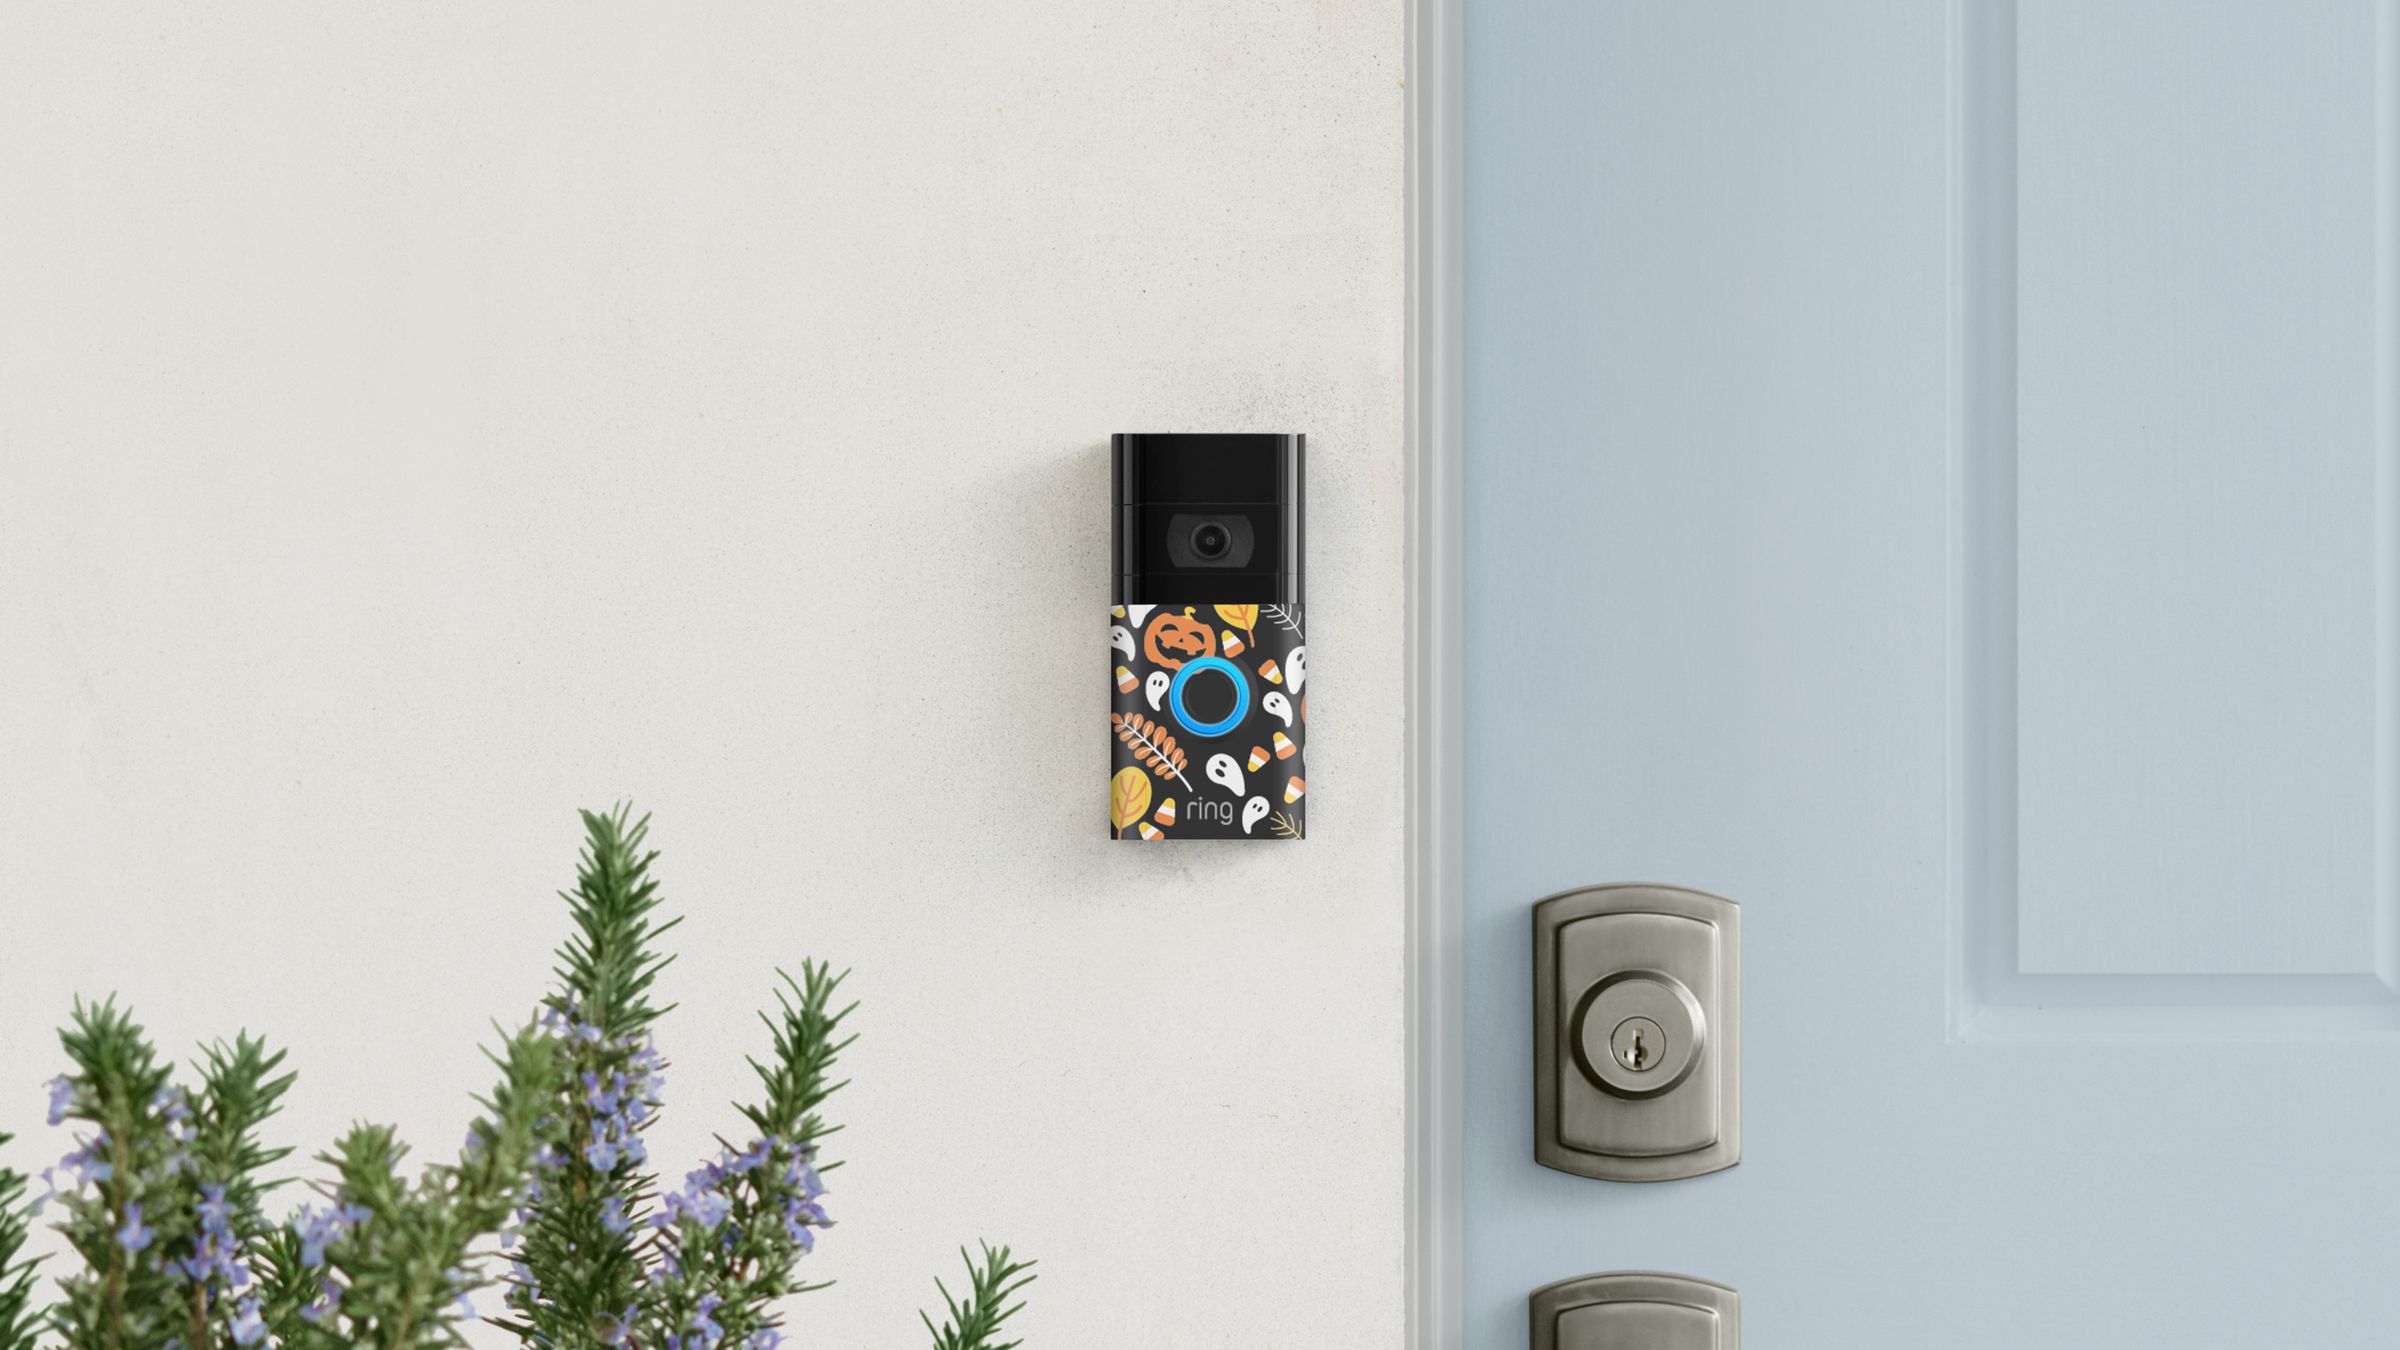 Ring doorbells can play spooky sounds and greet visitors with pithy Halloween-themed Quick Replies. Ring also sells holiday-themed faceplates to scare up your front door.